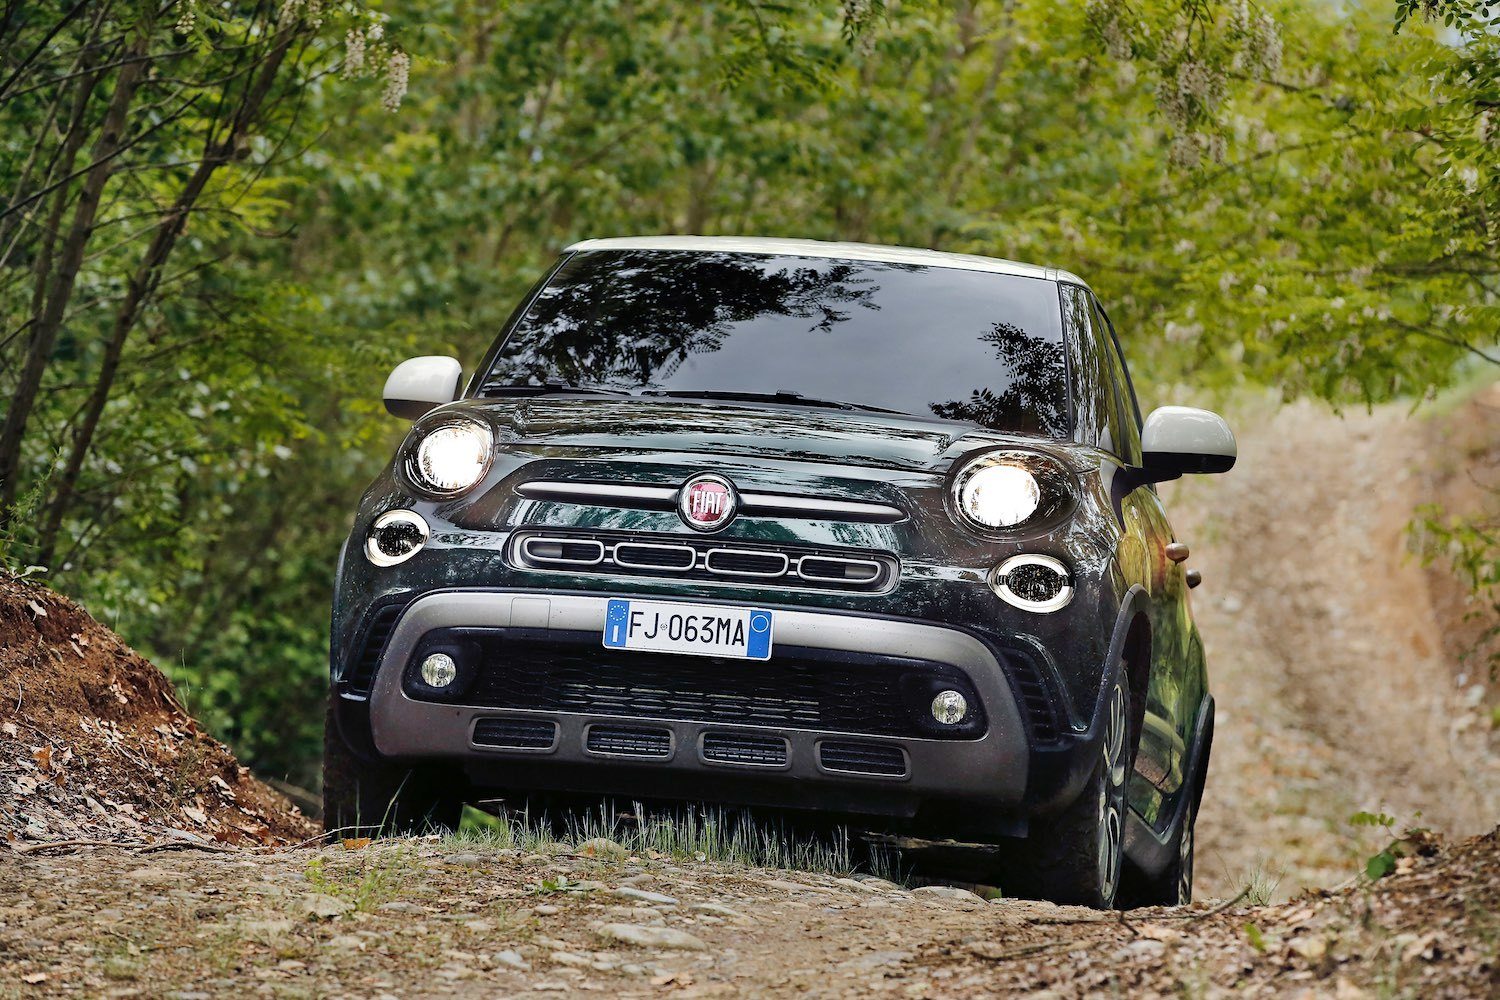 Tim Barnes-Clay reviews the New Fiat 500L from the first drive in Italy 8